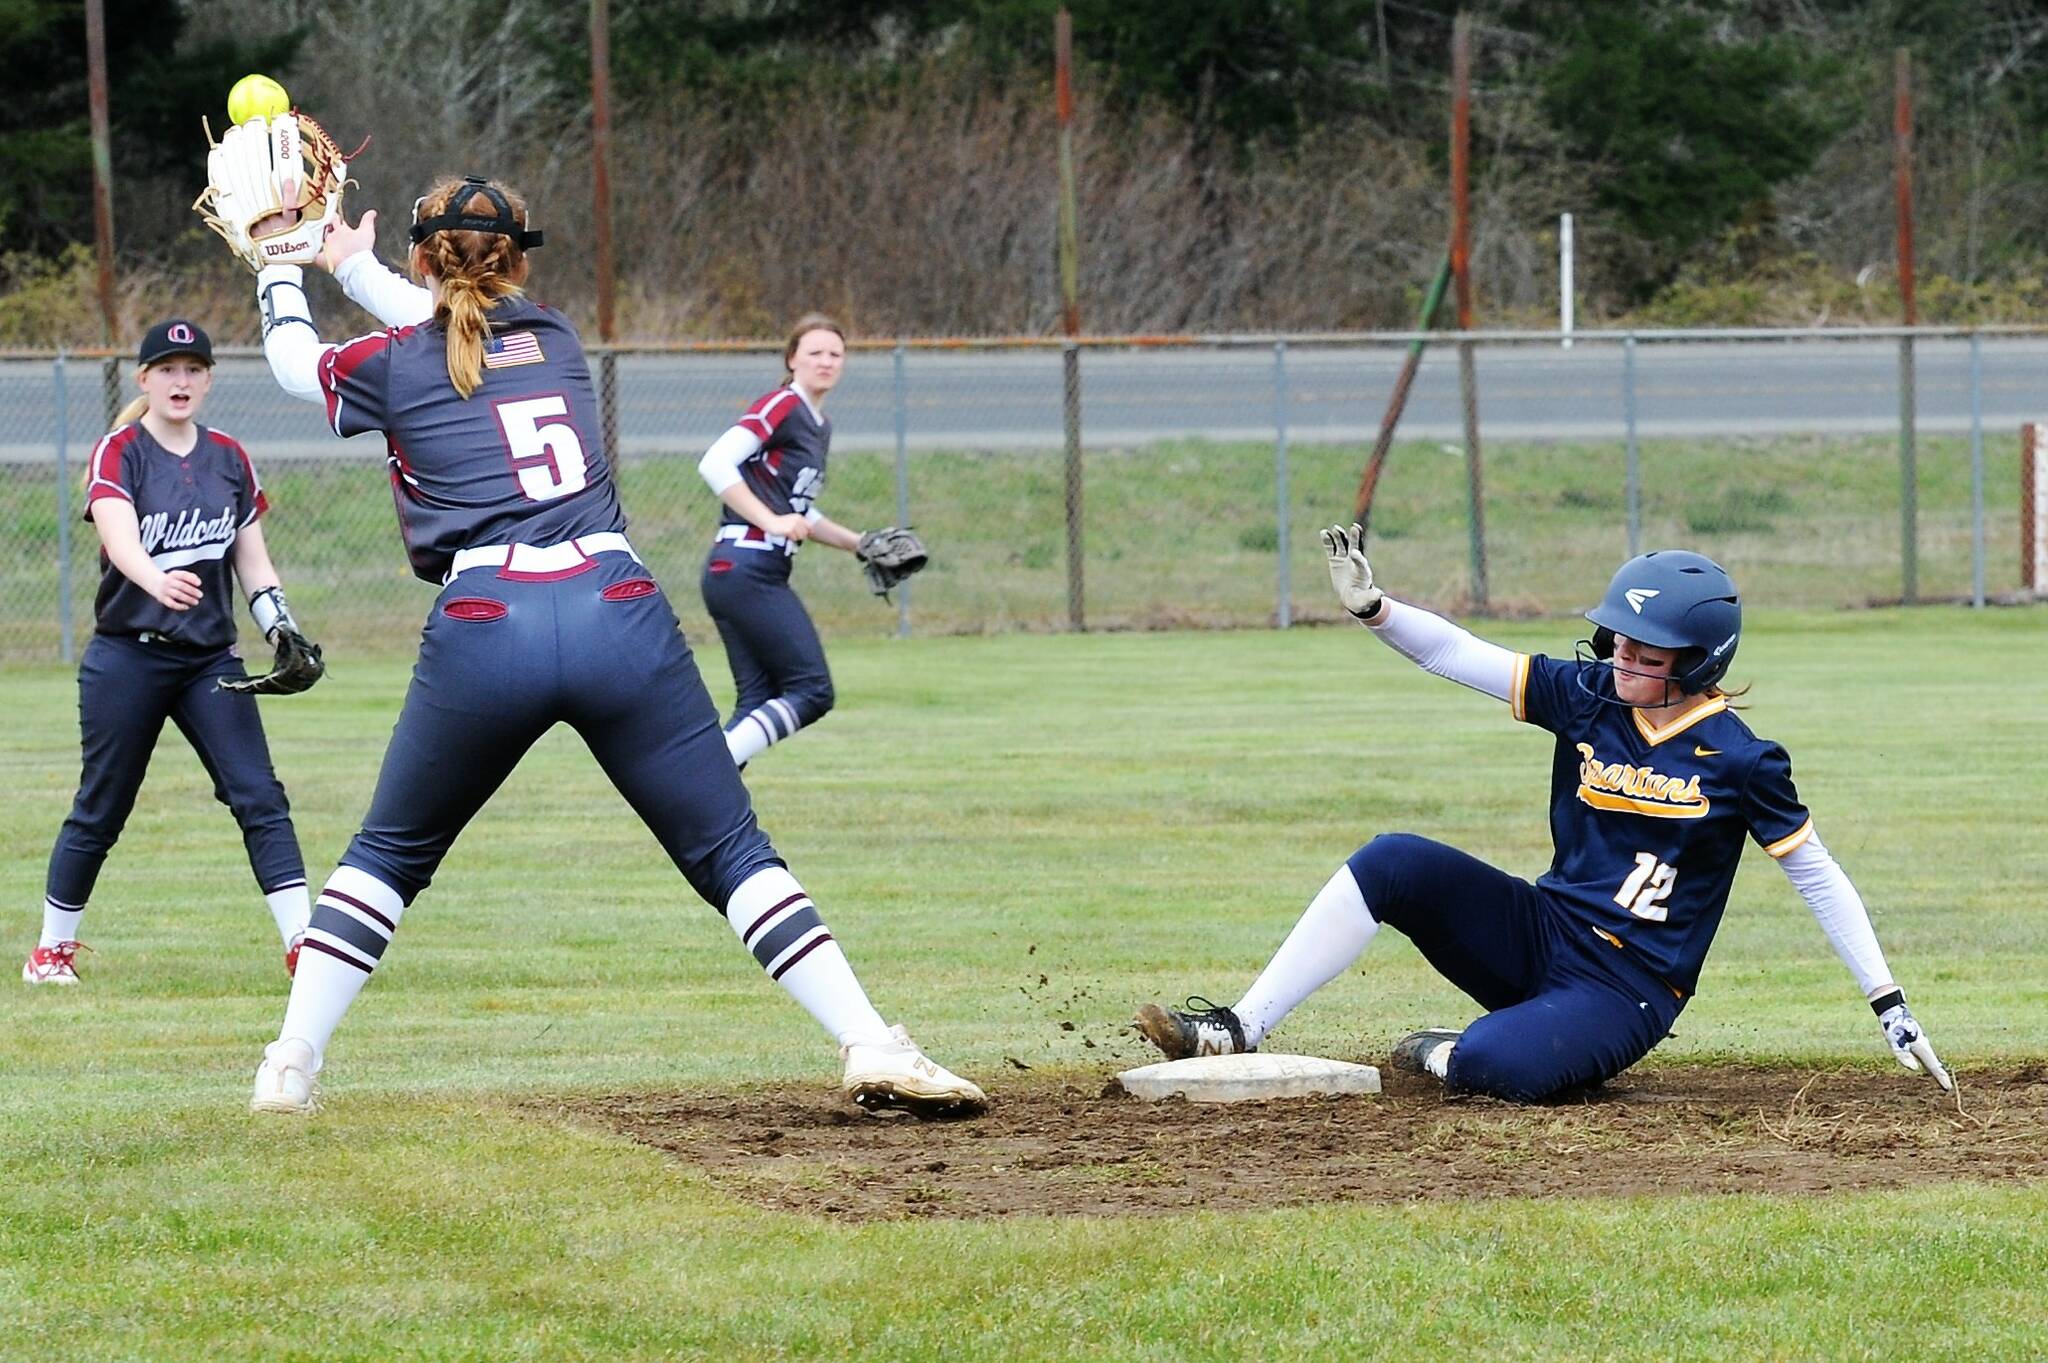 Chloe Gaydeski-St John was safe at second with a double.